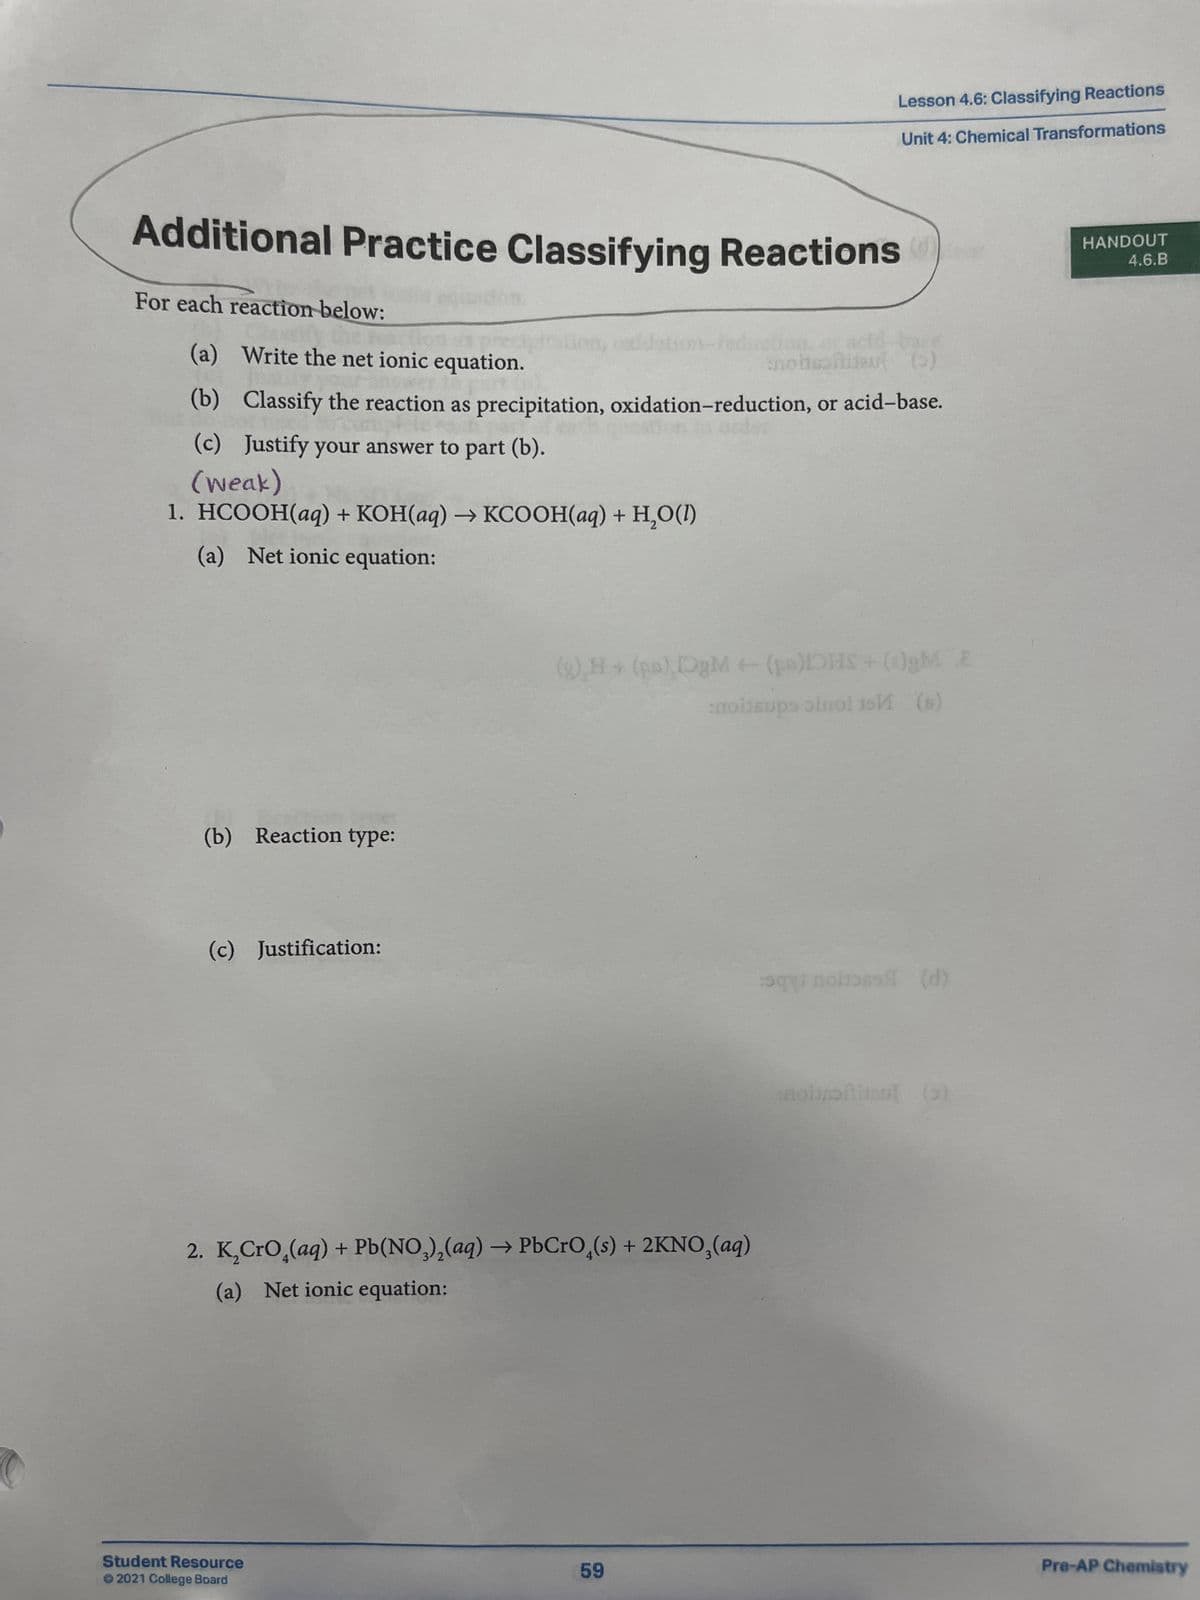 Lesson 4.6: Classifying Reactions
Unit 4: Chemical Transformations
Additional Practice Classifying Reactions
For each reaction below:
(a) Write the net ionic equation.
noit
(b) Classify the reaction as precipitation, oxidation-reduction, or acid-base.
(c) Justify your answer to part (b).
(weak)
1. HCOOH(aq) + KOH(aq) → KCOOH(aq) + H,O(D)
(a) Net ionic equation:
(b) Reaction type:
(c) Justification:
+
(8) H+ (pa) DgM (pa)IOHS+ ()gM E
moitsups oinol isИ (s)
2. K₂CrO4(aq) + Pb(NO3)2(aq) → PbCrO4(s) + 2KNO3(aq)
(a) Net ionic equation:
squ
sal (d)
noustie ()
HANDOUT
4.6.B
Pre-AP Chemistry
Student Resource
59
©2021 College Board